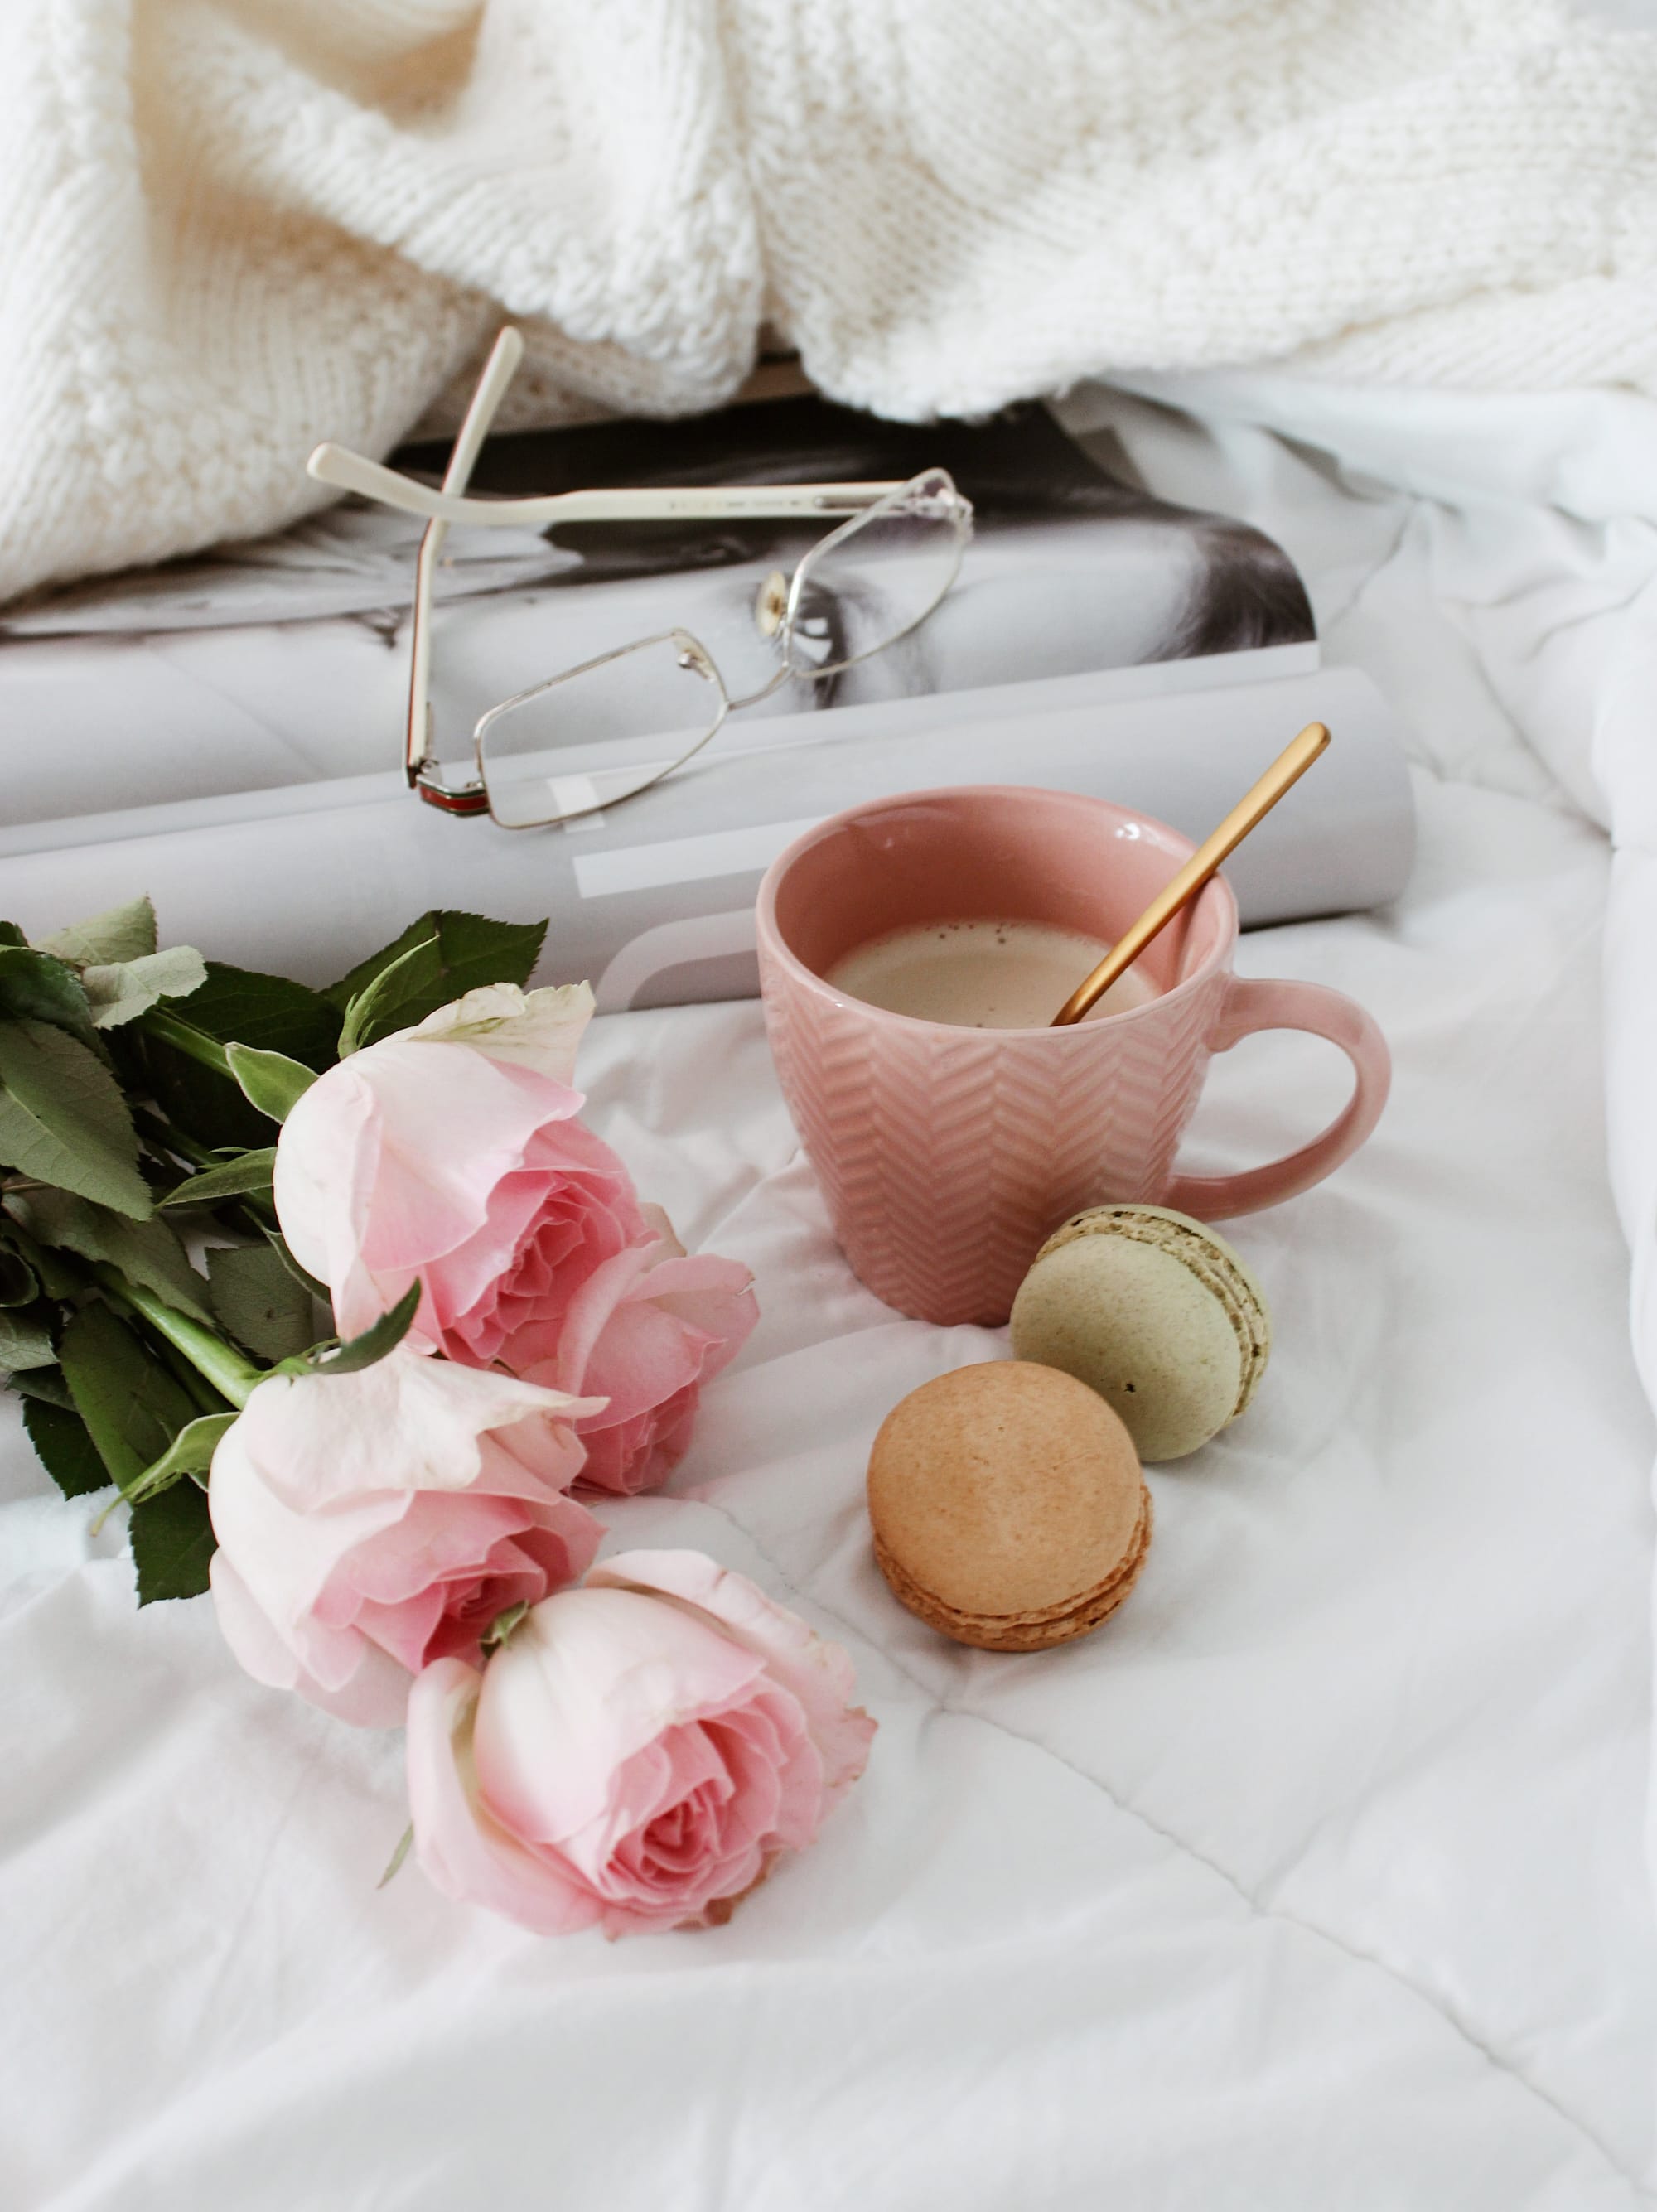 Roses with macarons